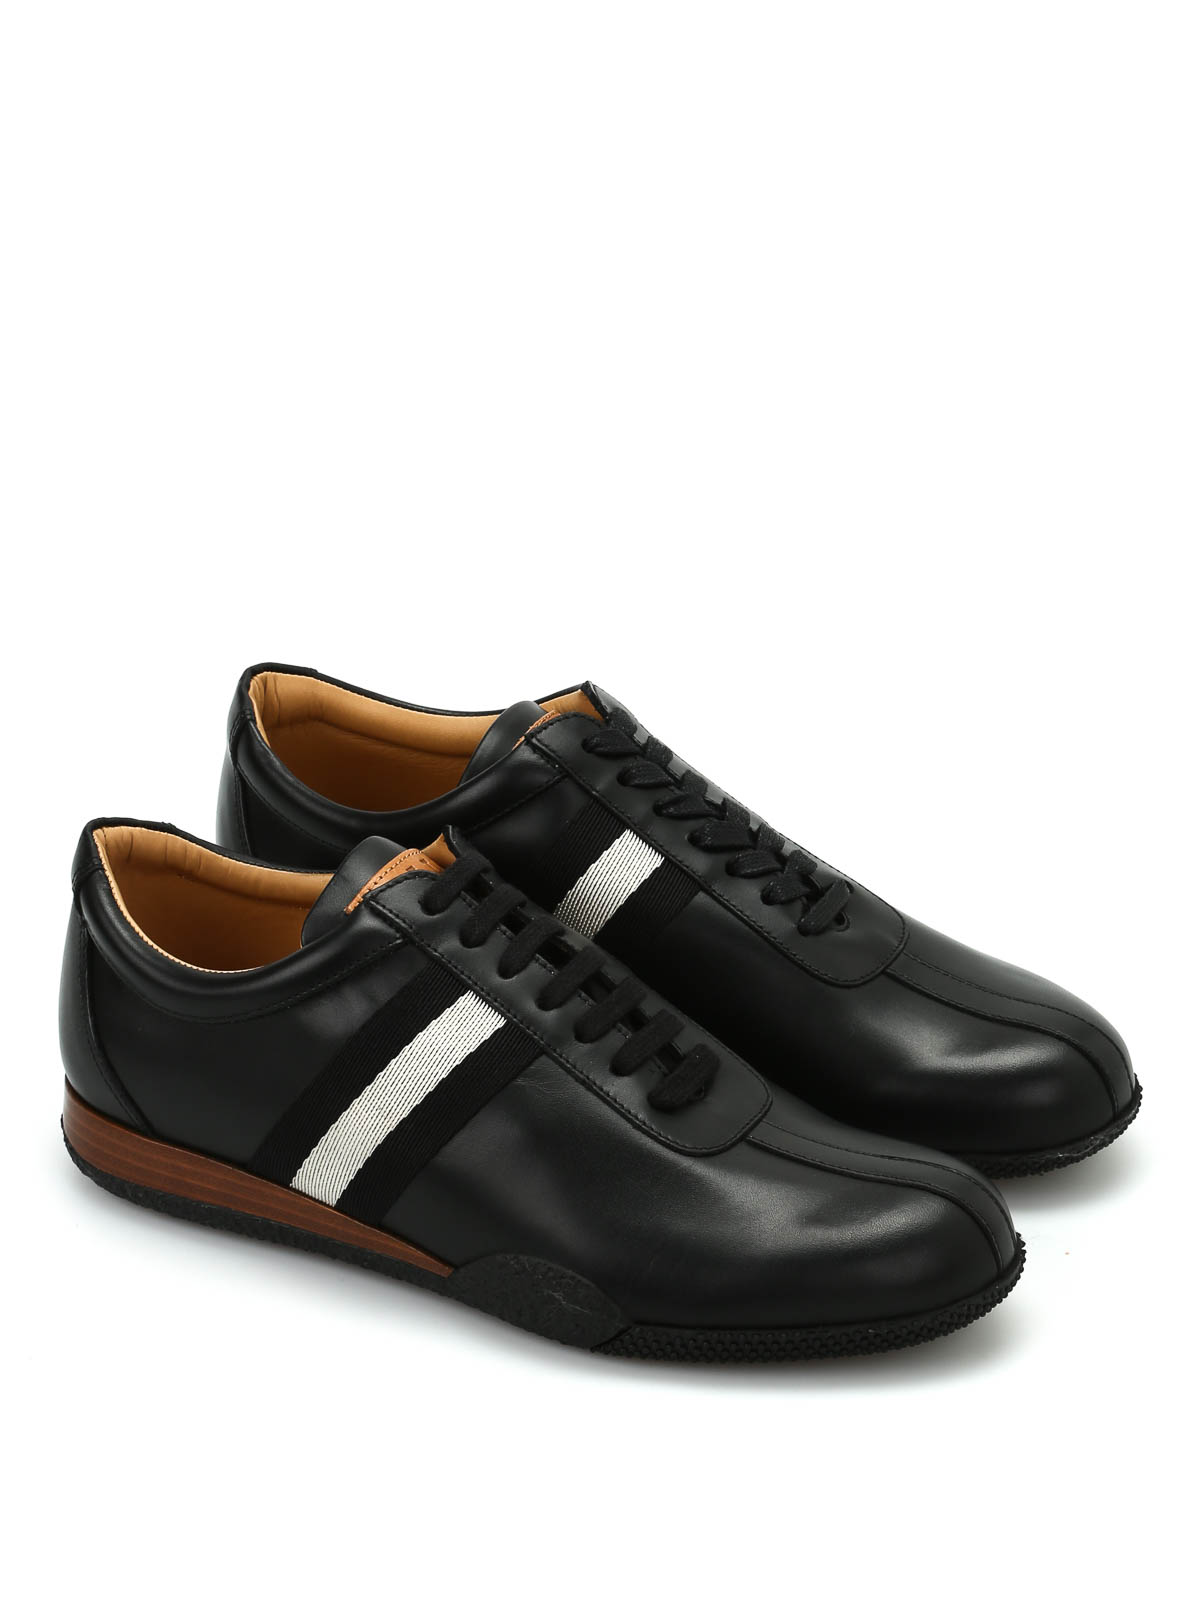 Bally - Leather striped sneakers 